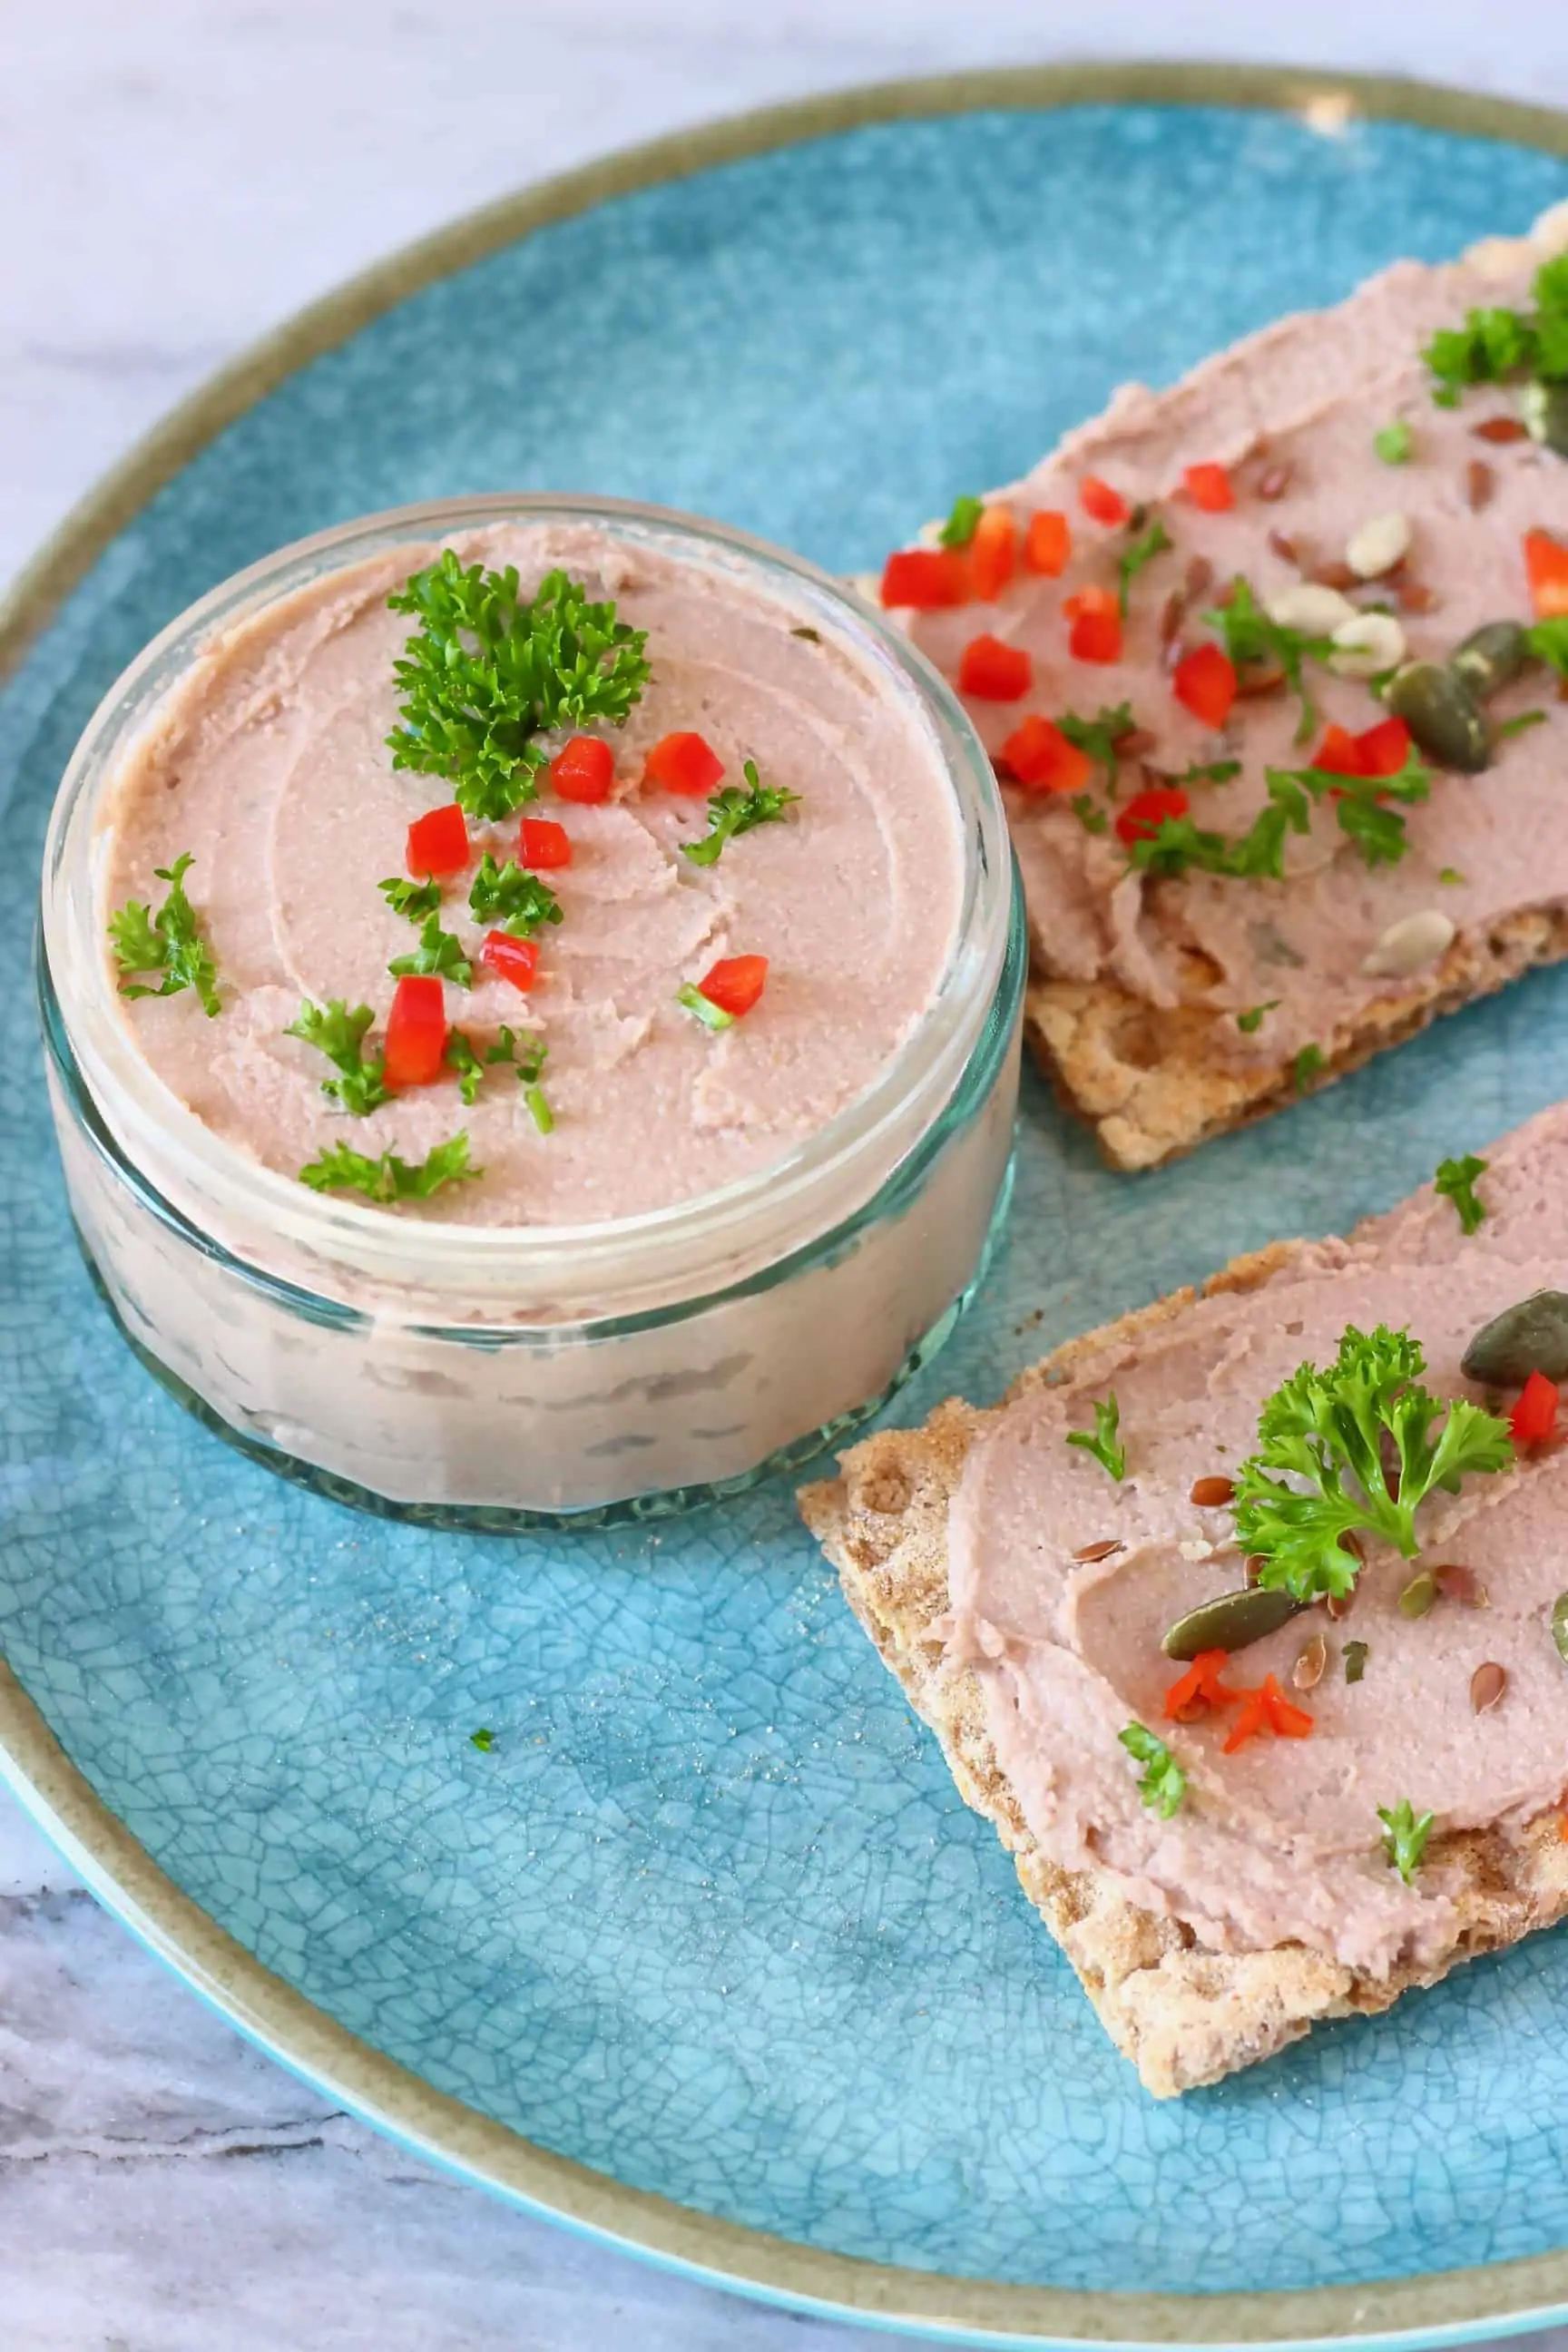 Photo of a glass pot filled with beige pâté topped with herbs and chopped red pepper on a blue plate with two rectangular crackers spread with pâté and decorated with pumpkin seeds, chopped red chilli and green herbs